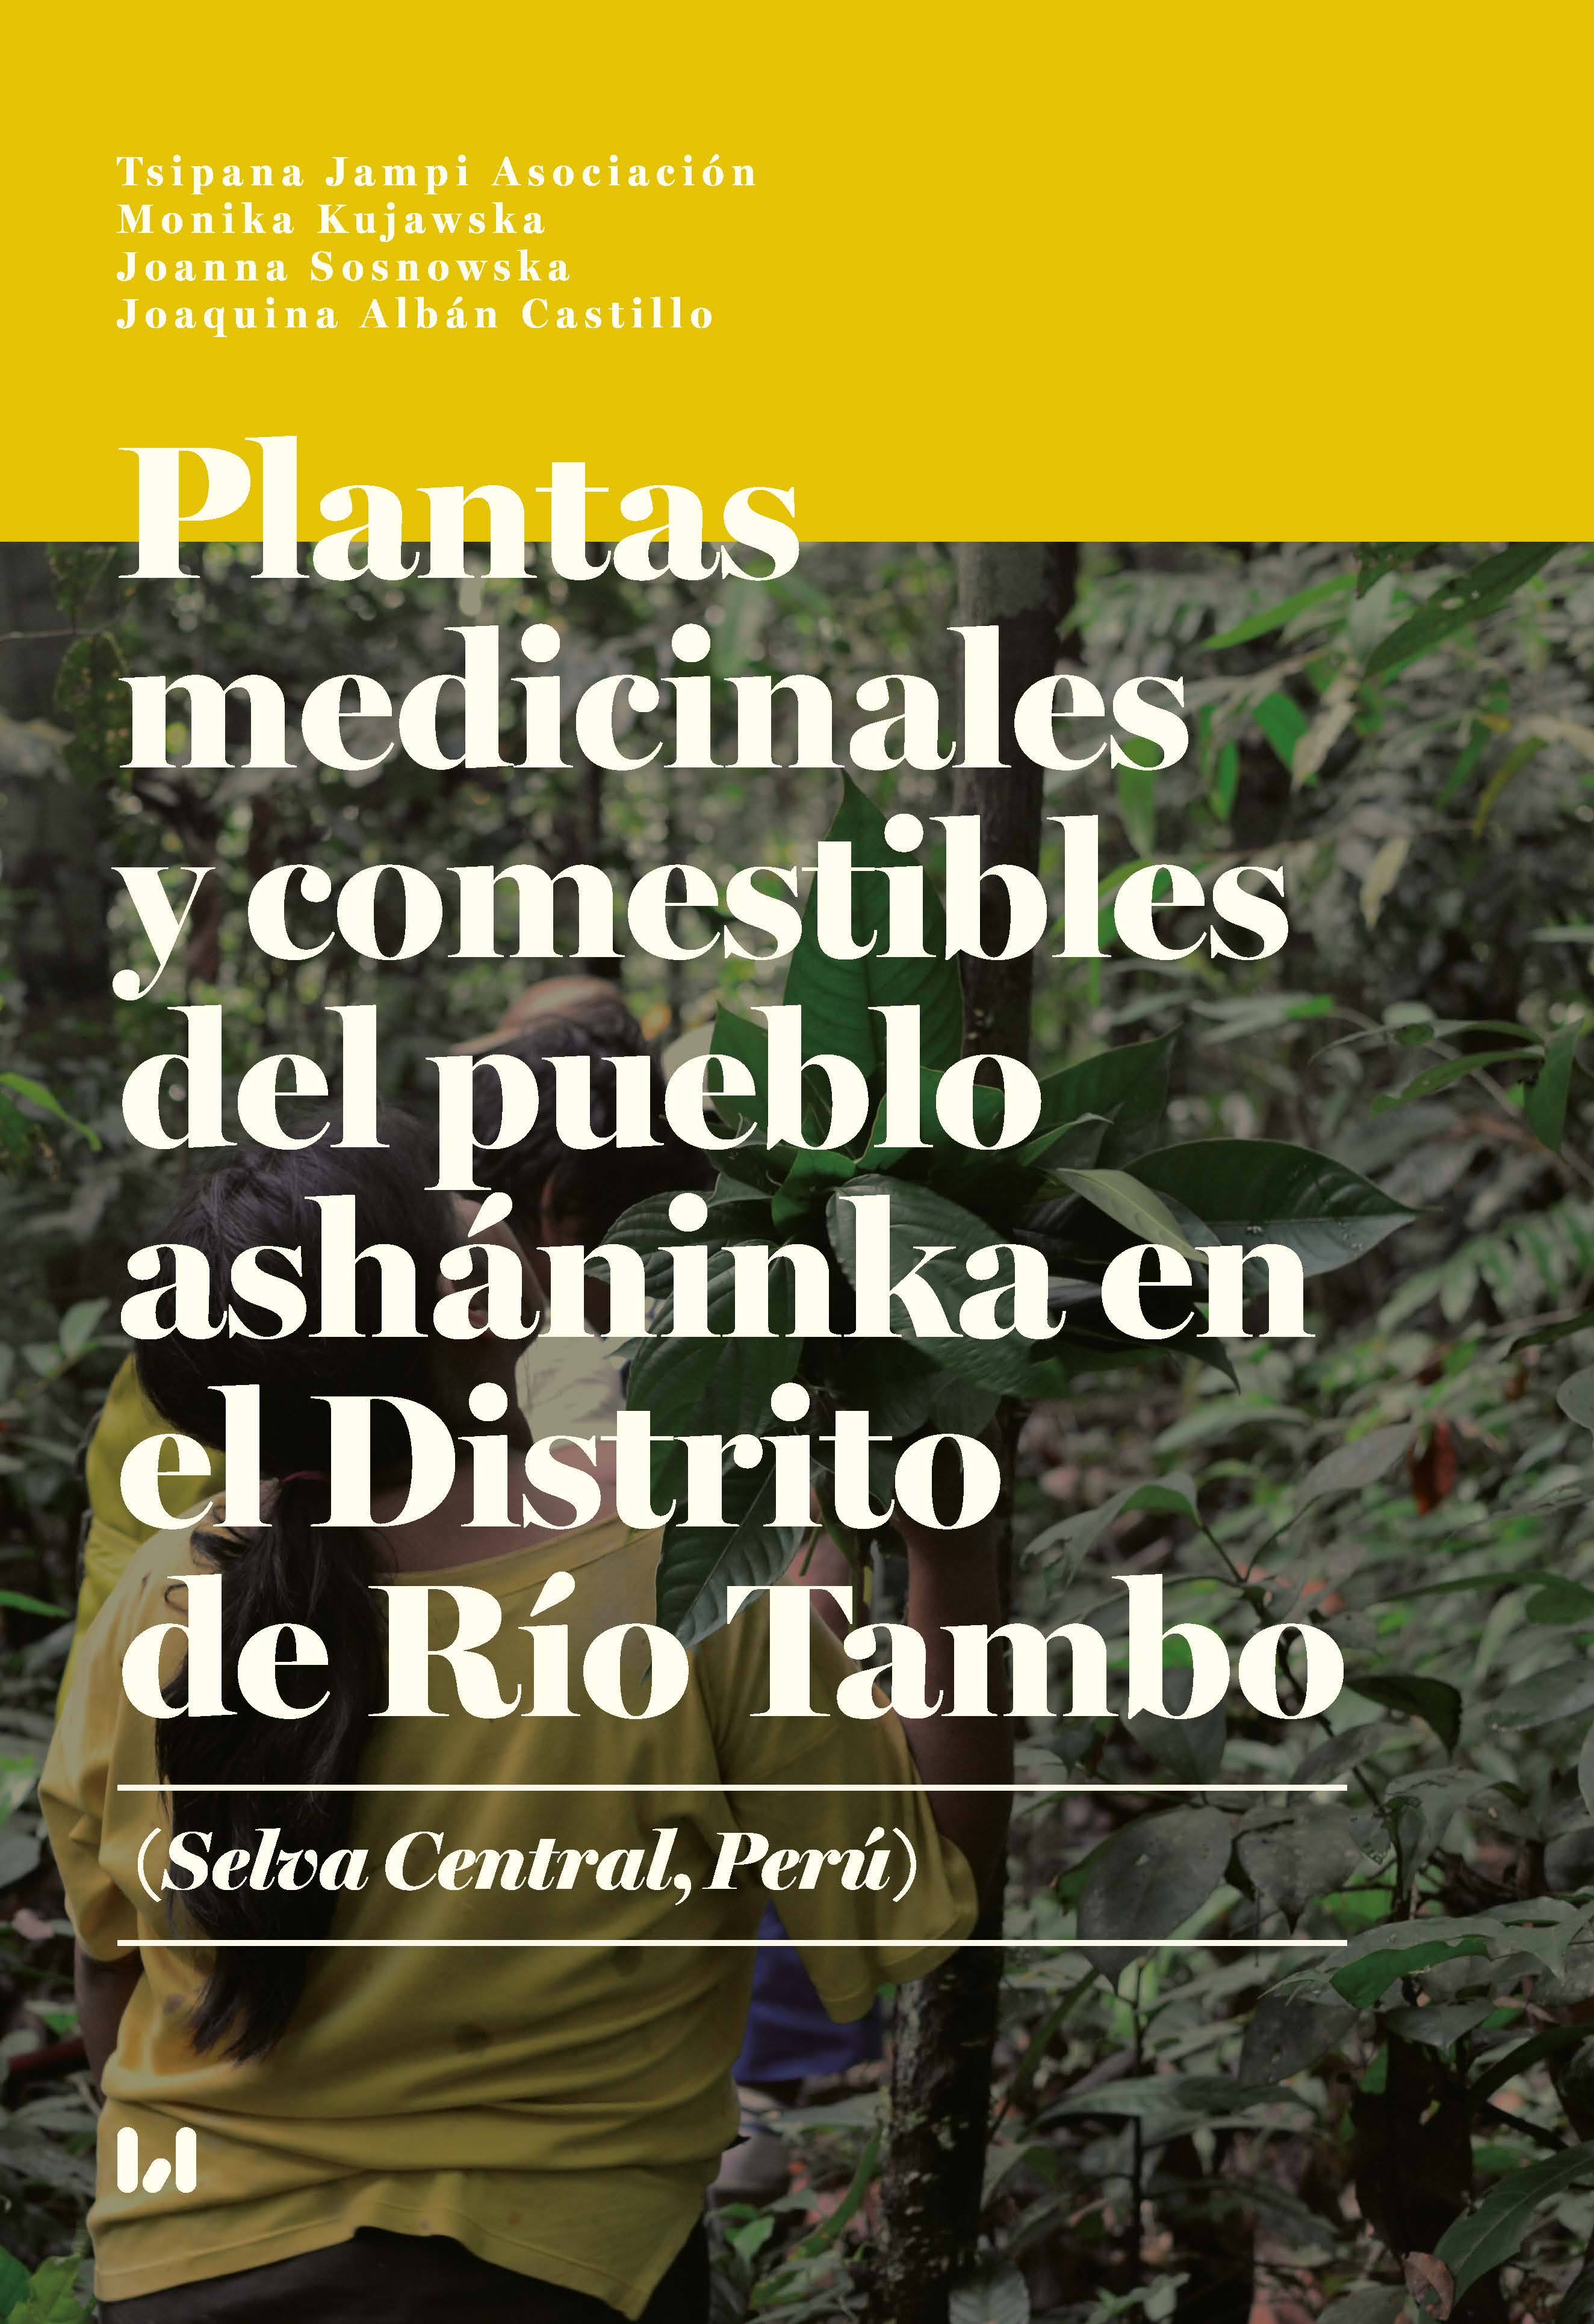 Medicinal and edible plants of the Asháninka people in the Rio Tambo District (Selva Central, Peru)